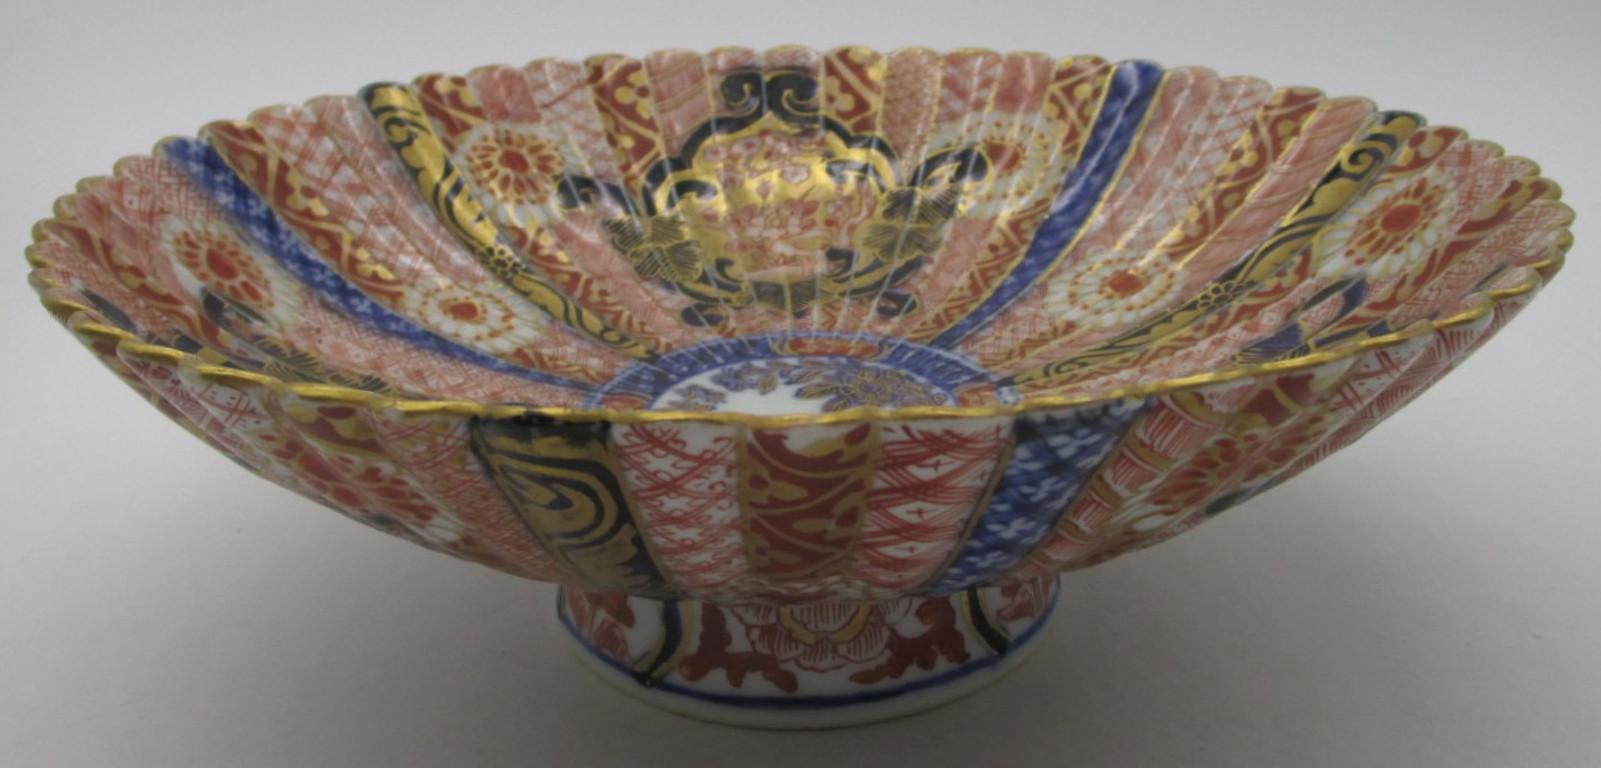 Exceptional Japanese late-19th century Meiji period signed Imari raised and ribbed porcelain deep charger, circa 1875, extremely intricately hand-painted on both sides in cobalt blue underglaze and polychrome enamelling in red and generous